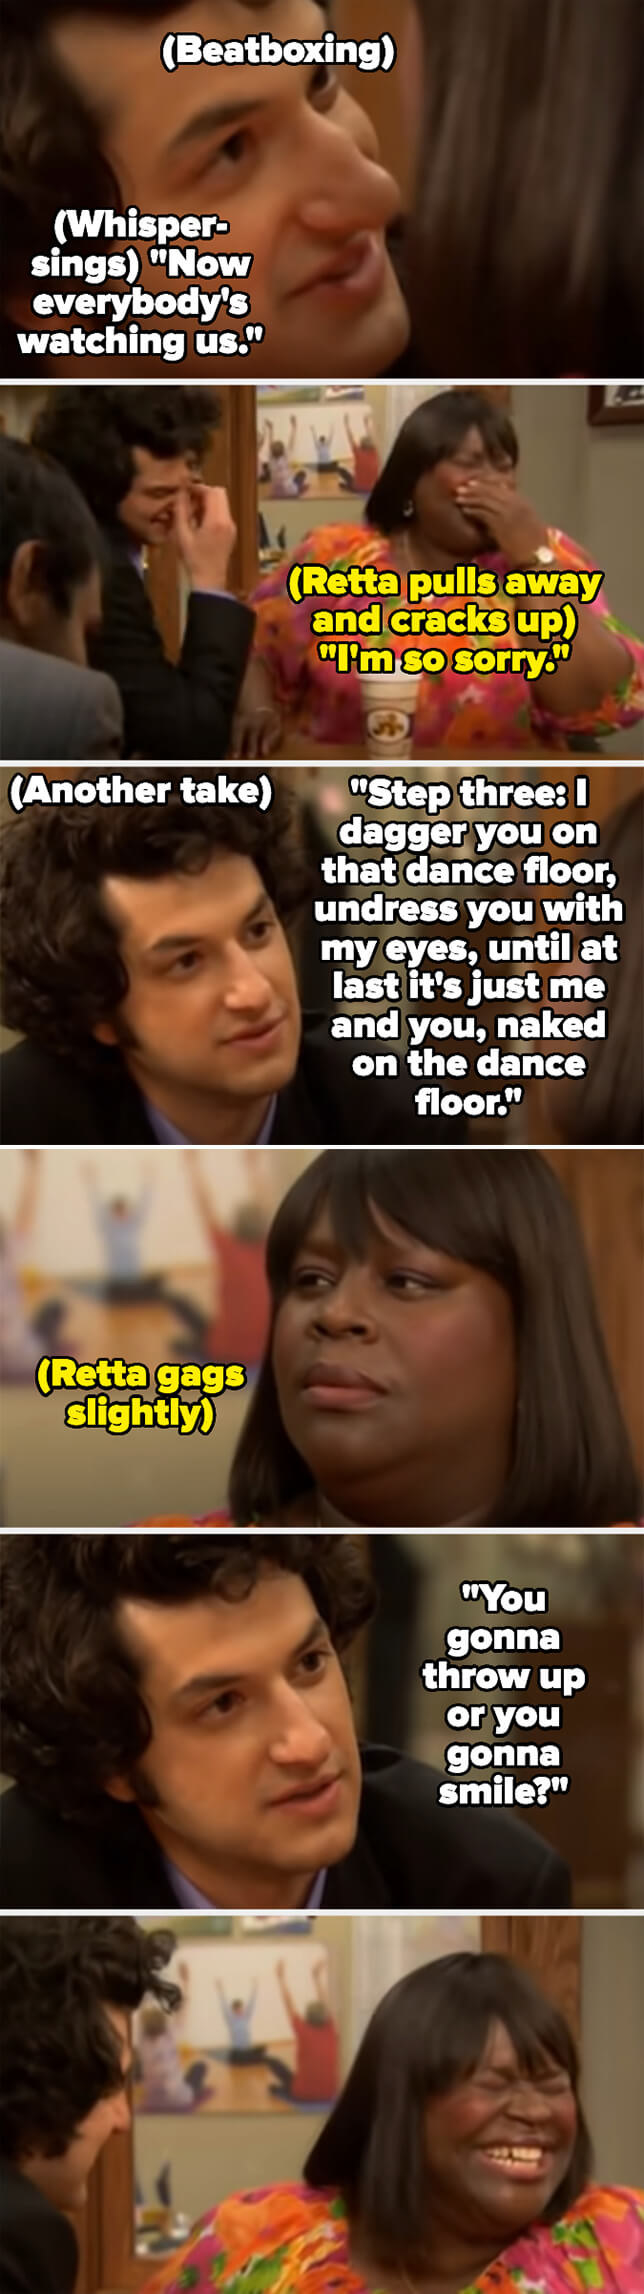 Ben says his lines, including &quot;Now everybody&#x27;s watching us&quot; and says how it&#x27;s eventually just the two of them naked on the dance floor, as Retta laughs